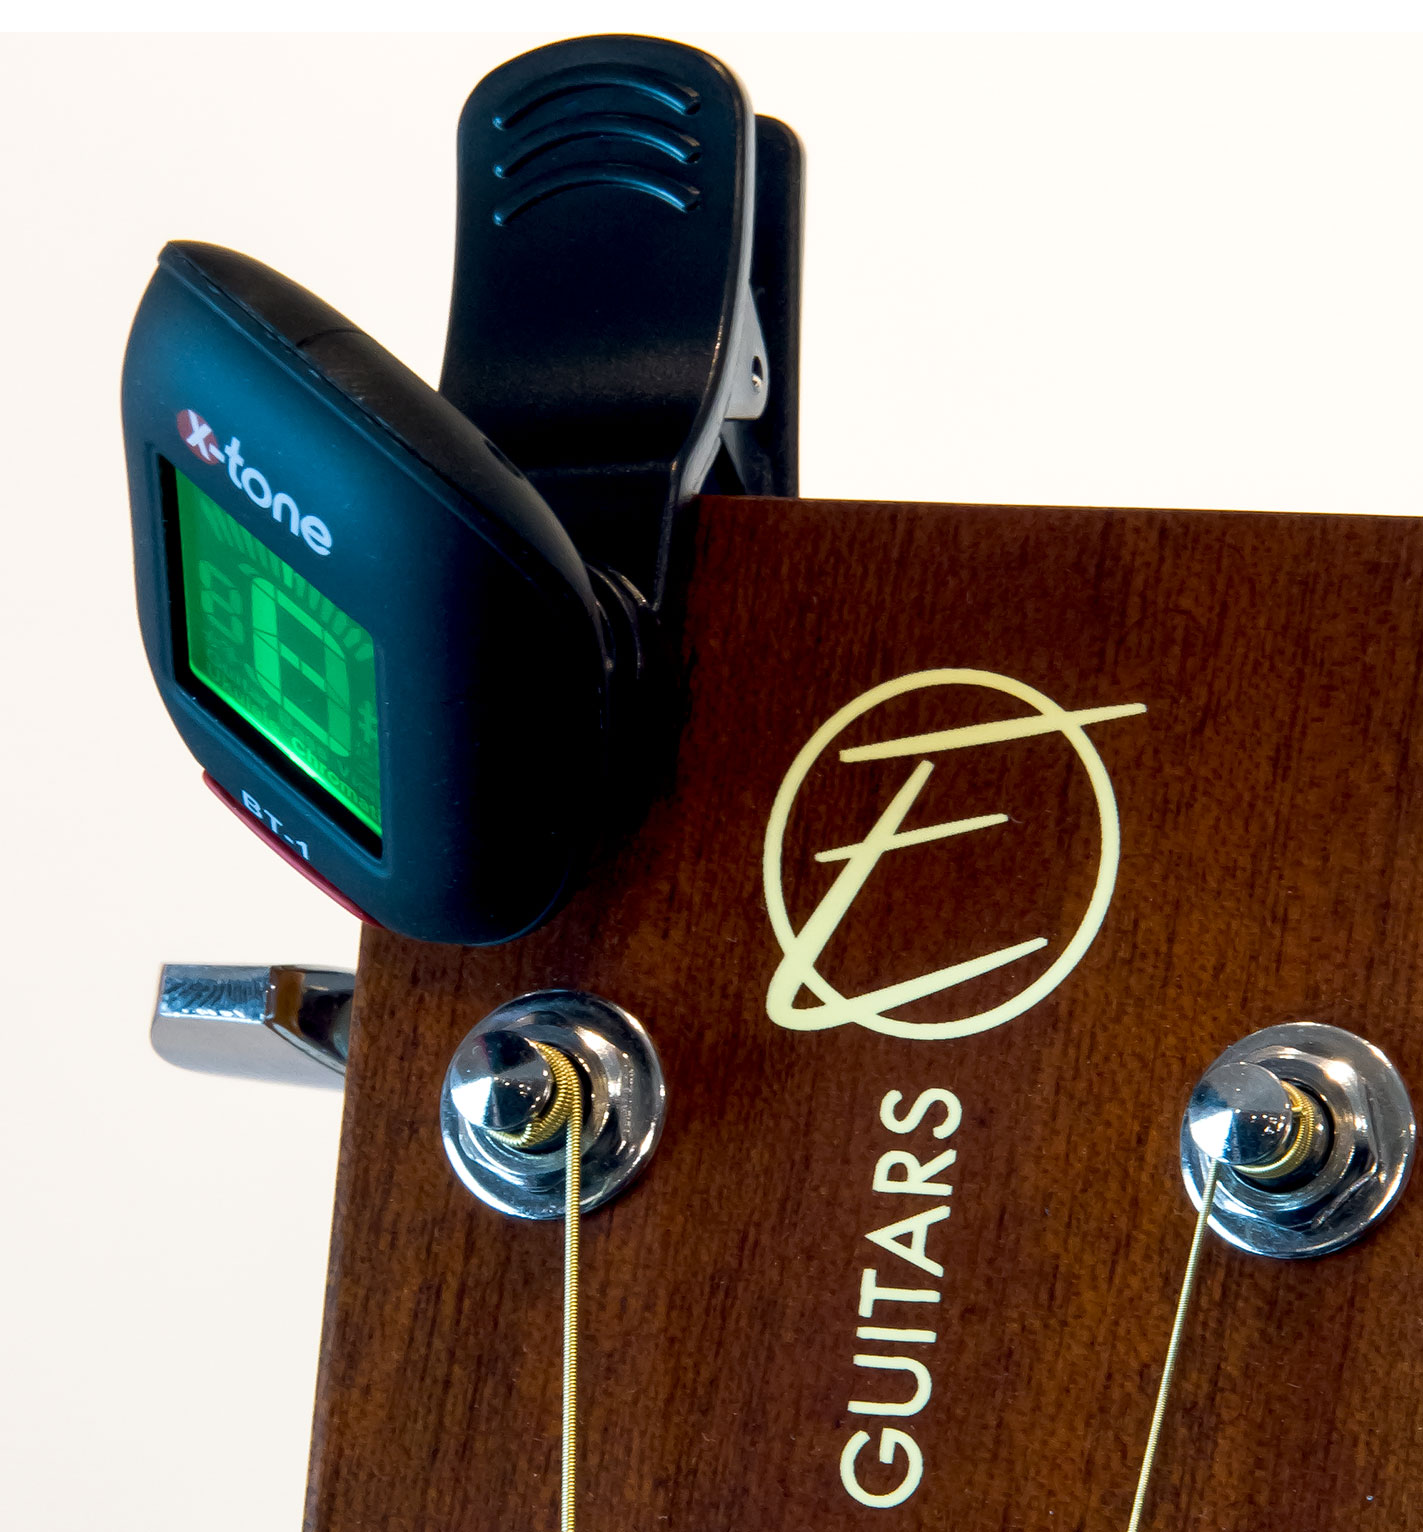 X-tone 3110 Clip-on Tuner Pince - Guitar tuner - Variation 5